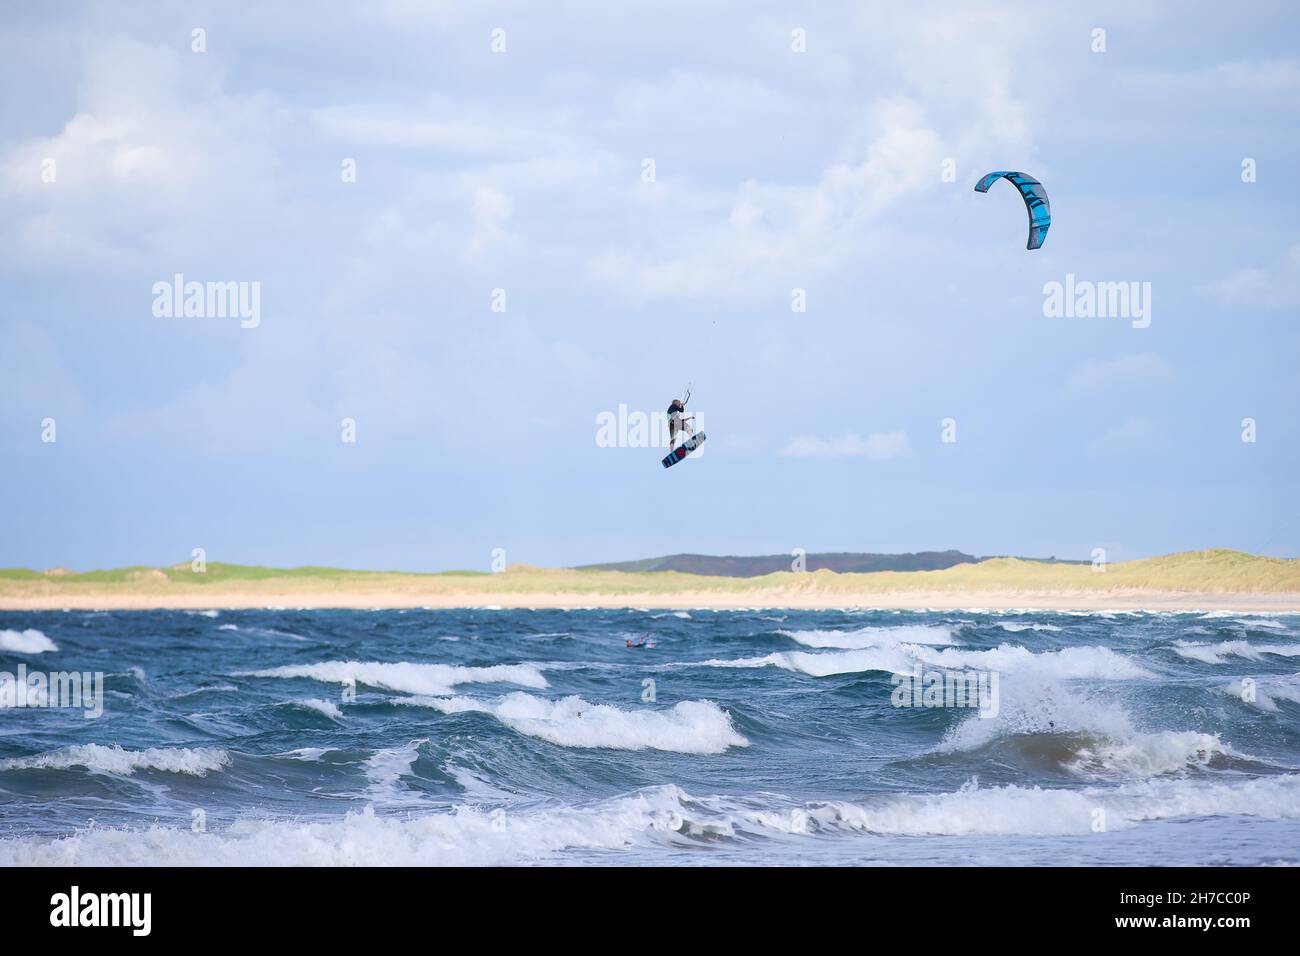 Kite surfers catching air off the Co. Sligo coast in the Atlantic Ocean off Ireland's west coast.  Just some of the fun on the Wild Atlantic Way. Stock Photo